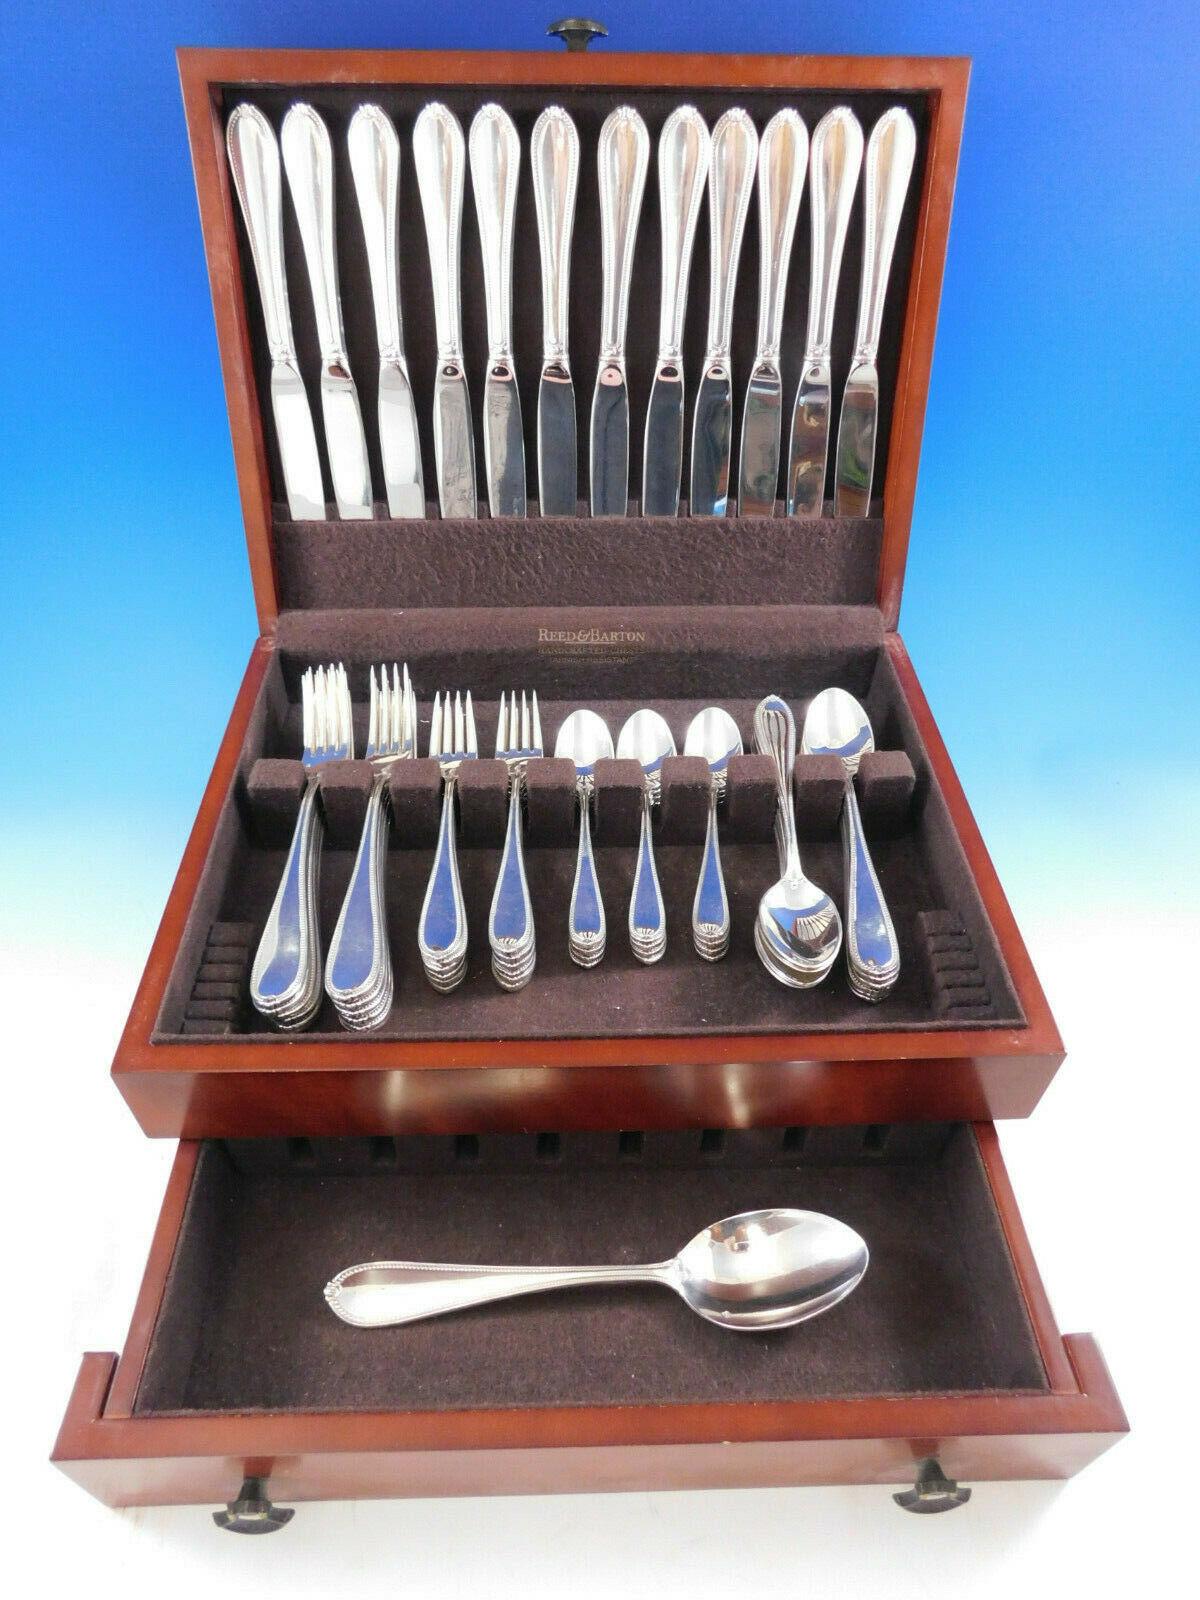 Superb dinner size triumph by Tuttle sterling silver flatware set, 61 pieces. This set includes:

12 dinner size knives, 10 1/4